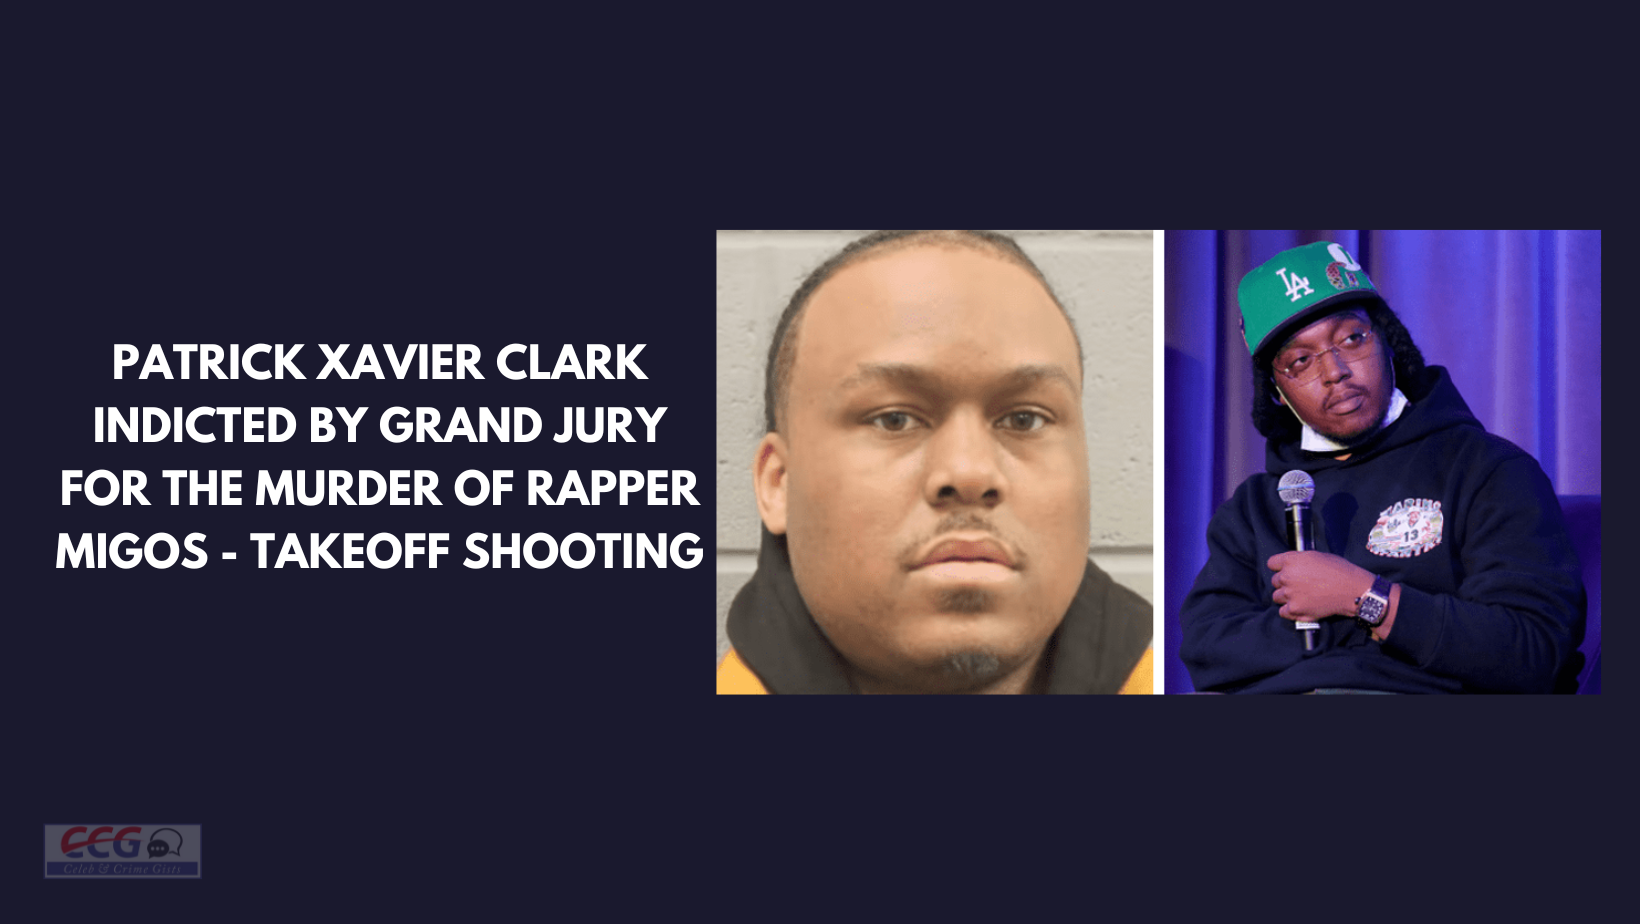 Patrick Xavier Clark indicted by grand jury for the murder of rapper Migos